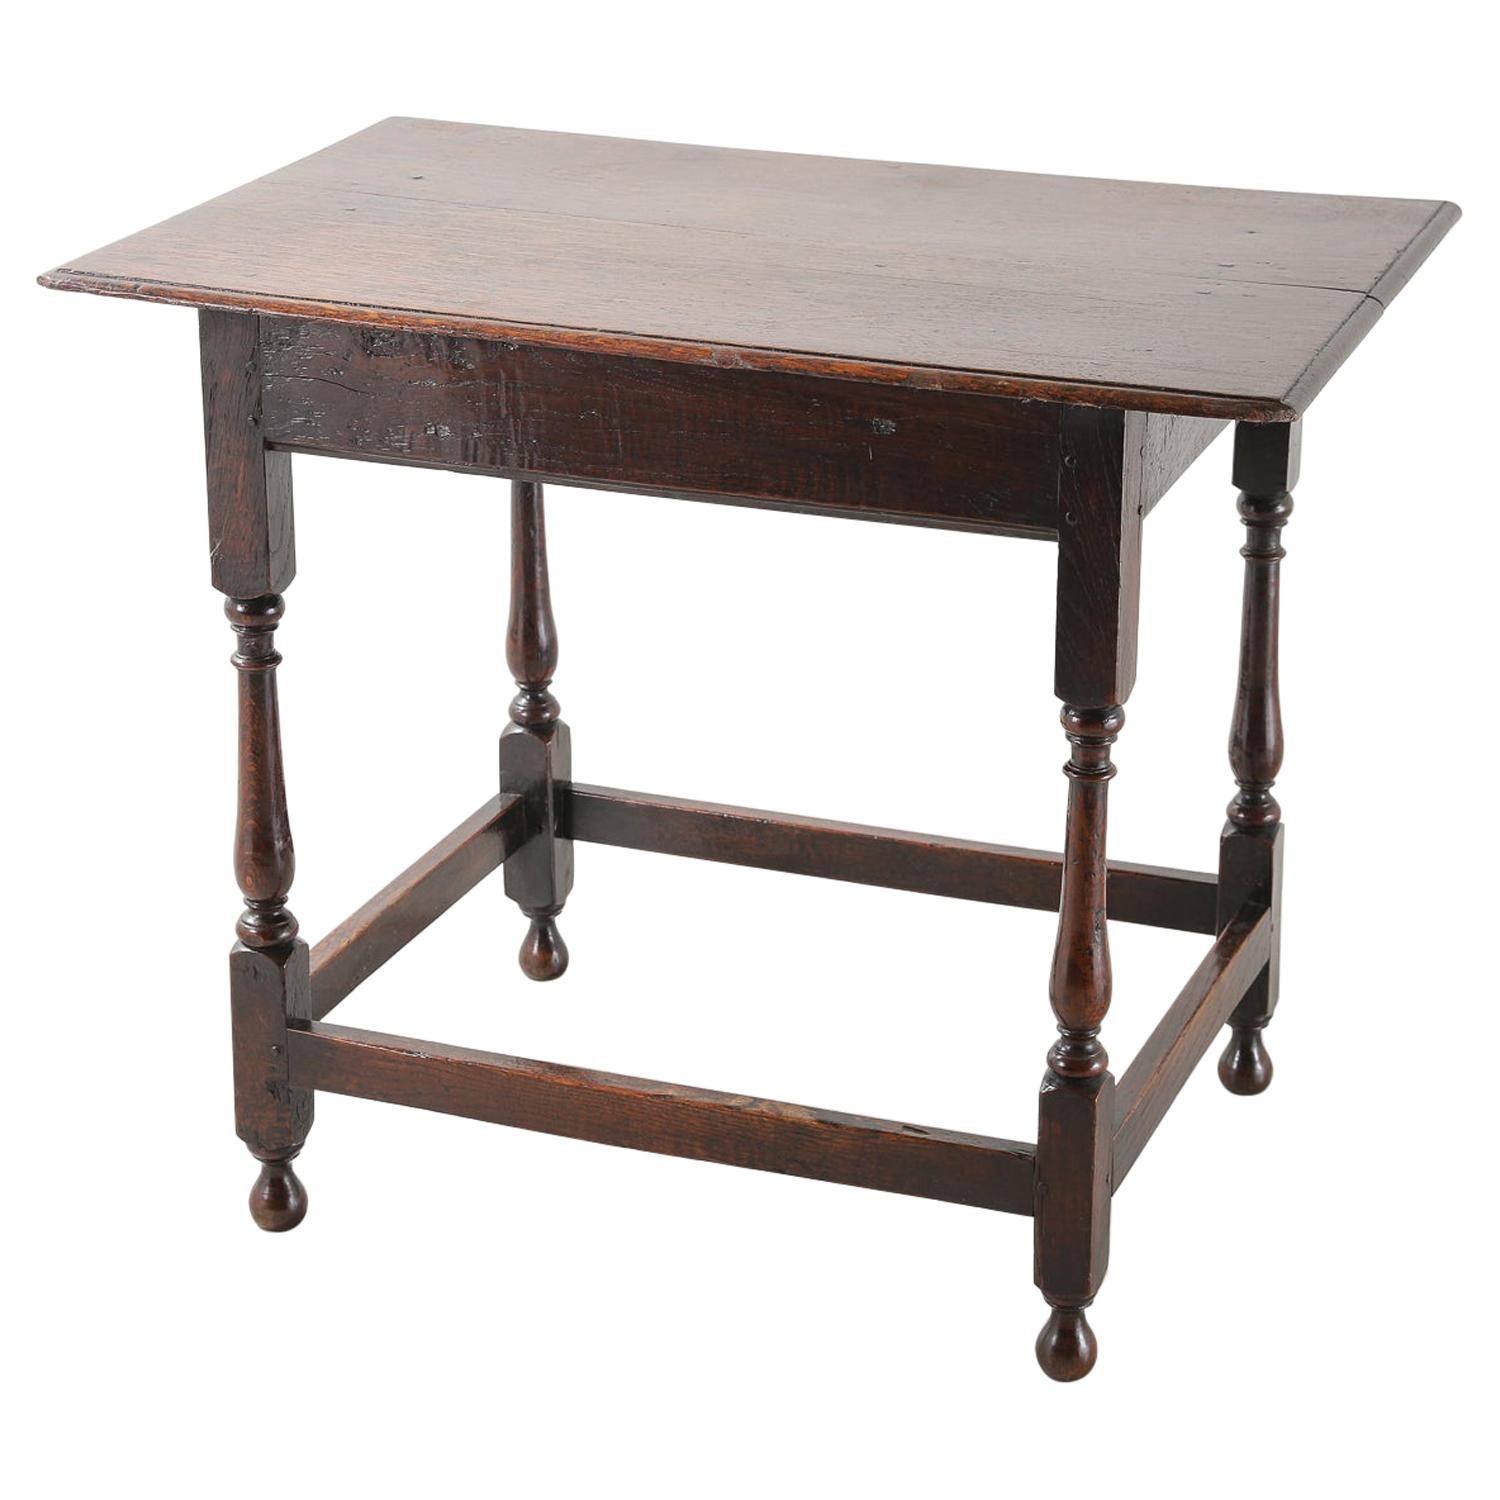 Early 18th Century Oak Centre Table with Turned Legs